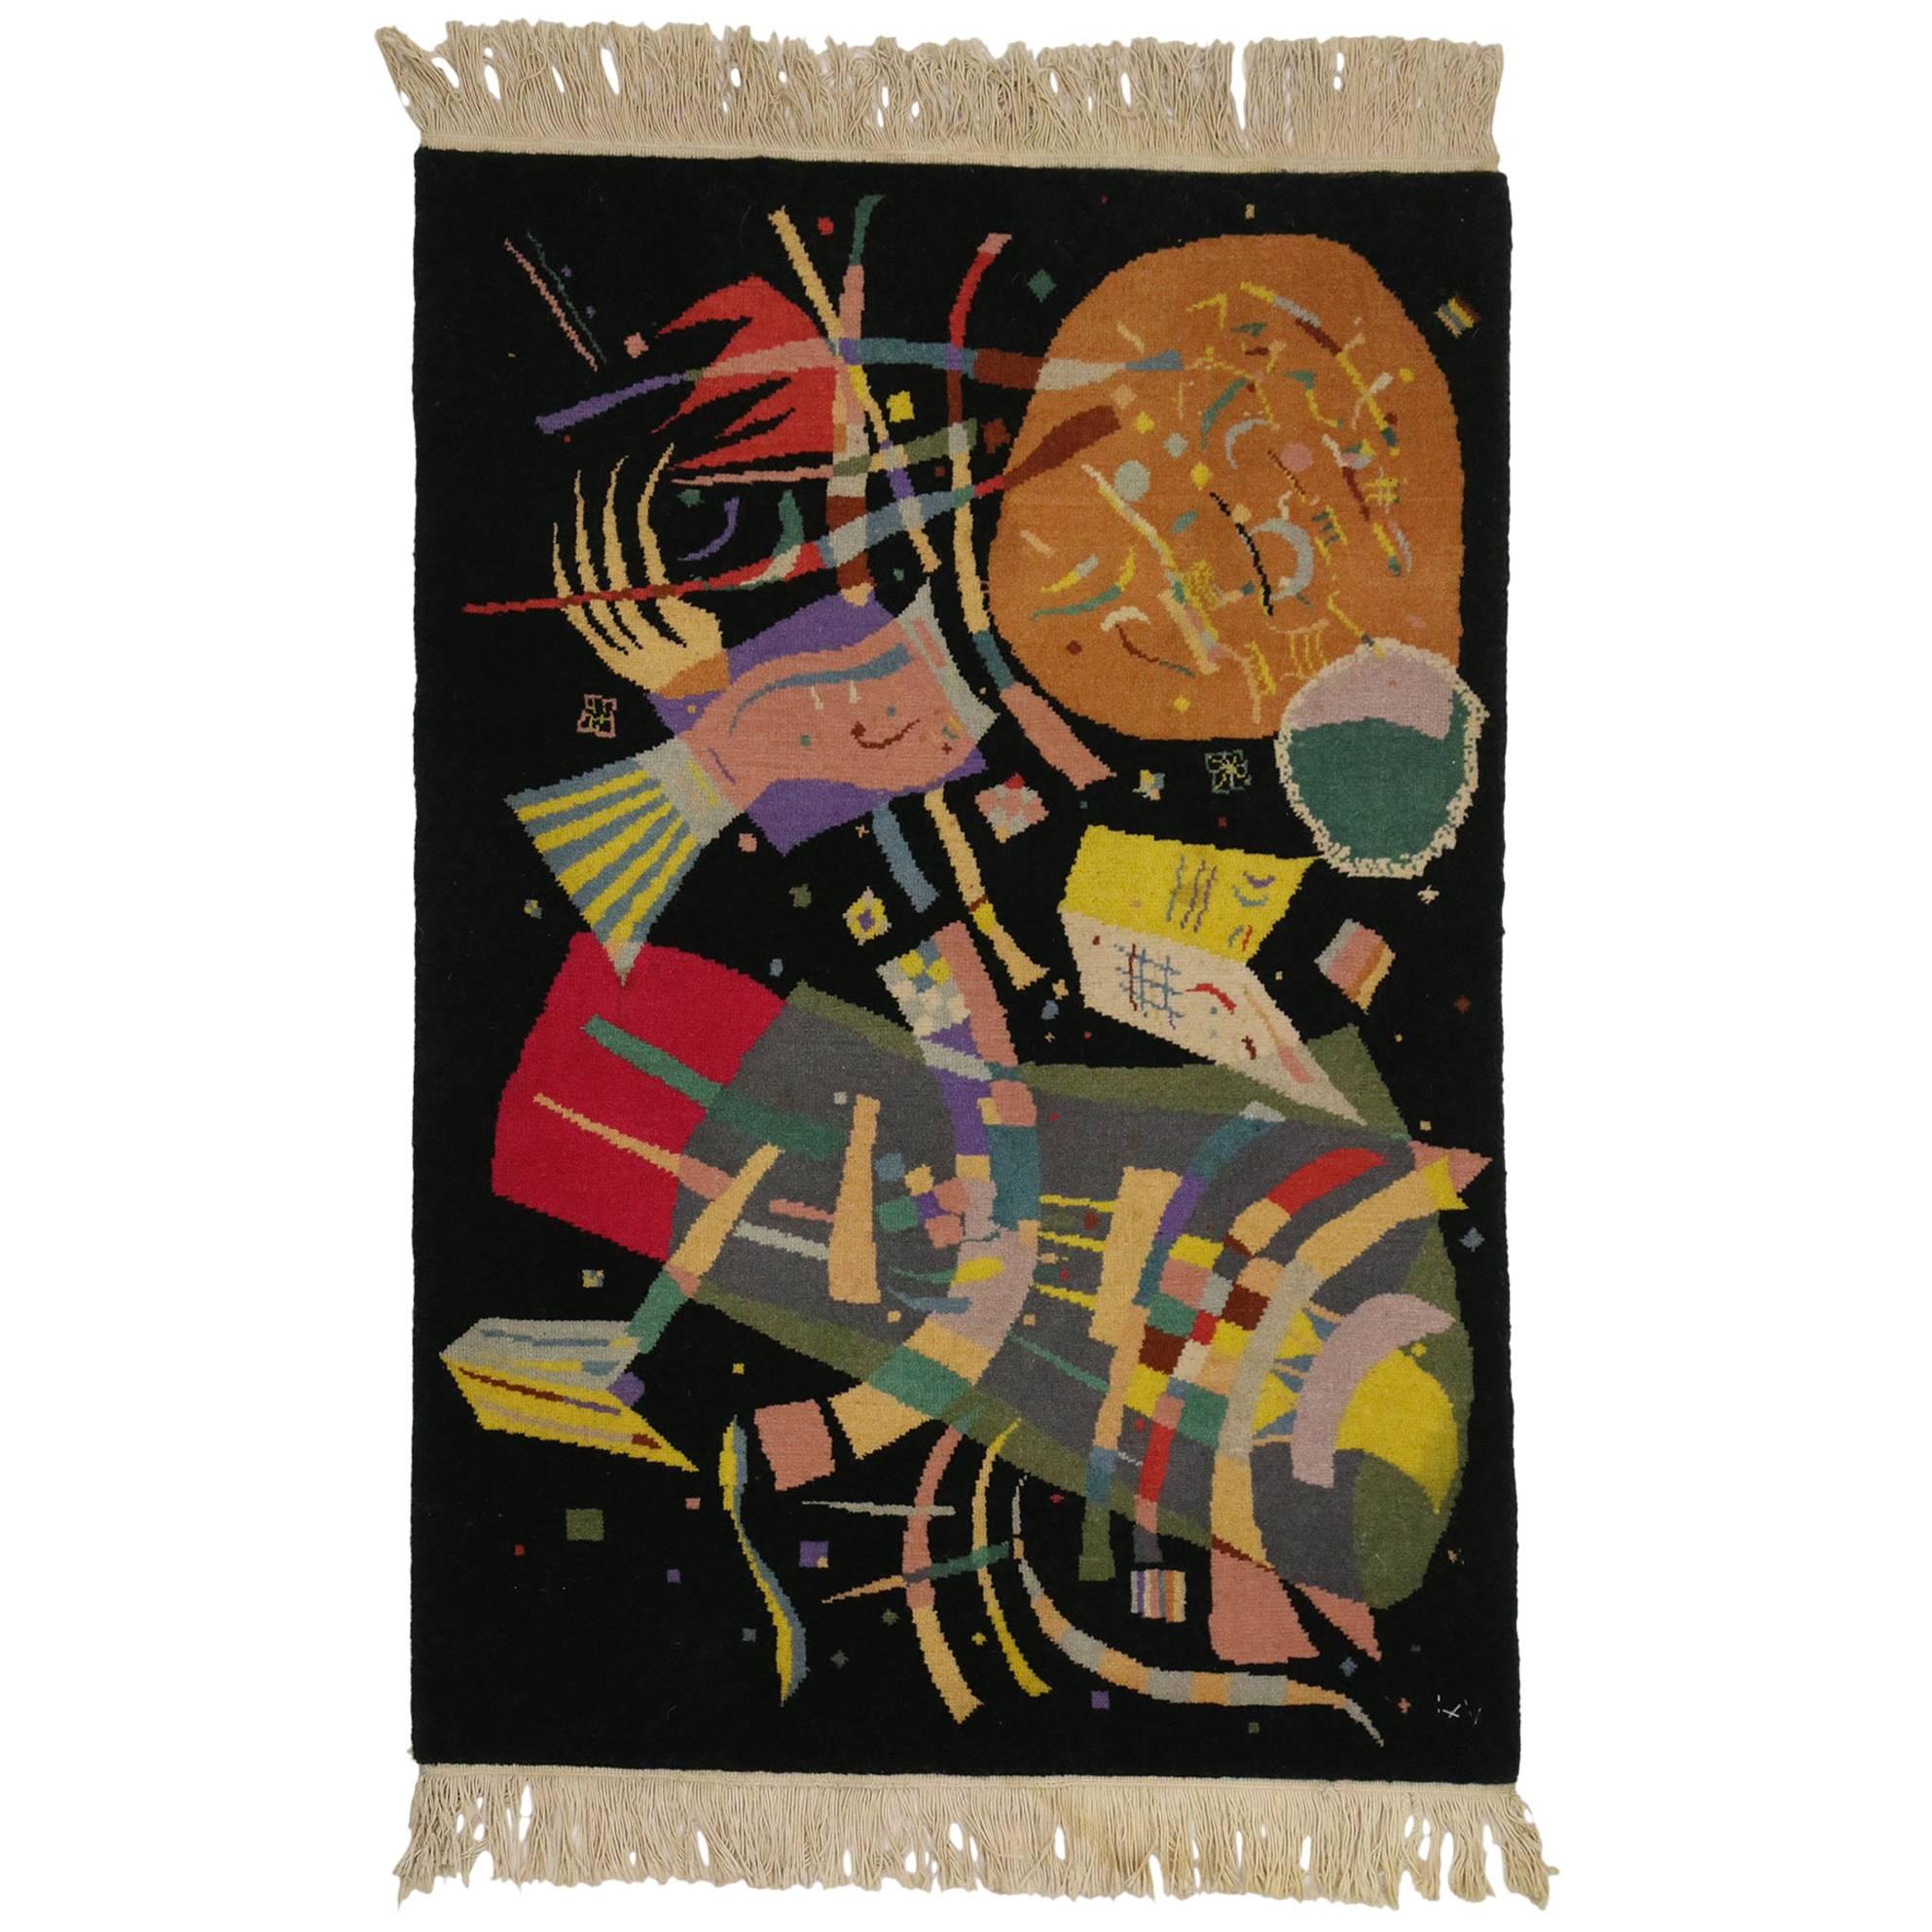 Contemporary Abstract Tapestry Inspired by Wassily Kandinsky's "Composition X"